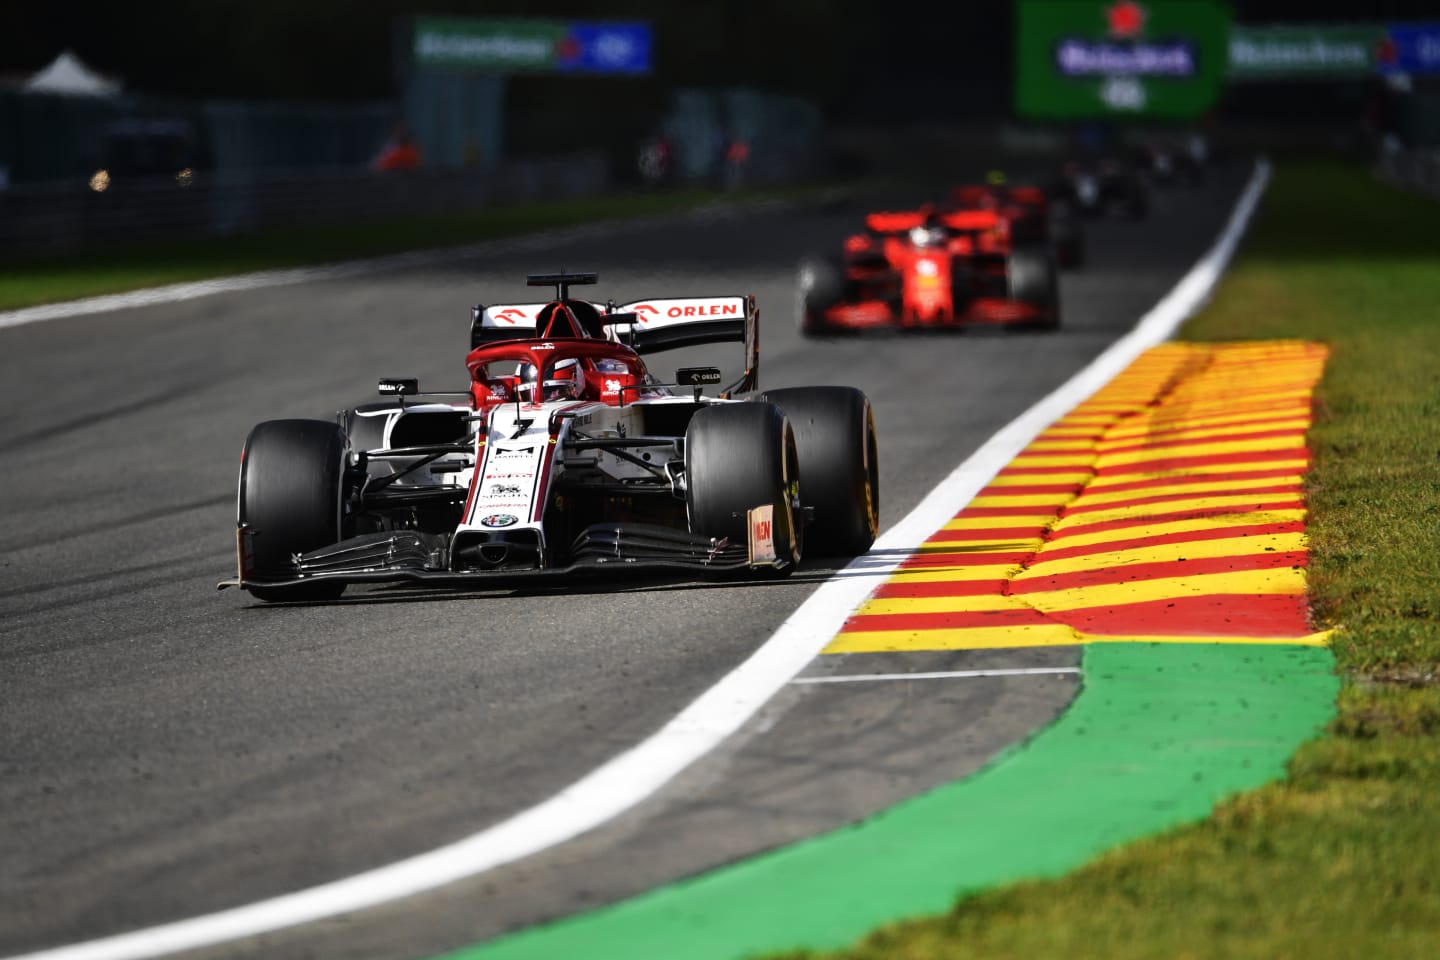 SPA, BELGIUM - AUGUST 30: Kimi Raikkonen of Finland driving the (7) Alfa Romeo Racing C39 Ferrari on track during the F1 Grand Prix of Belgium at Circuit de Spa-Francorchamps on August 30, 2020 in Spa, Belgium. (Photo by John Thuys/Pool via Getty Images)